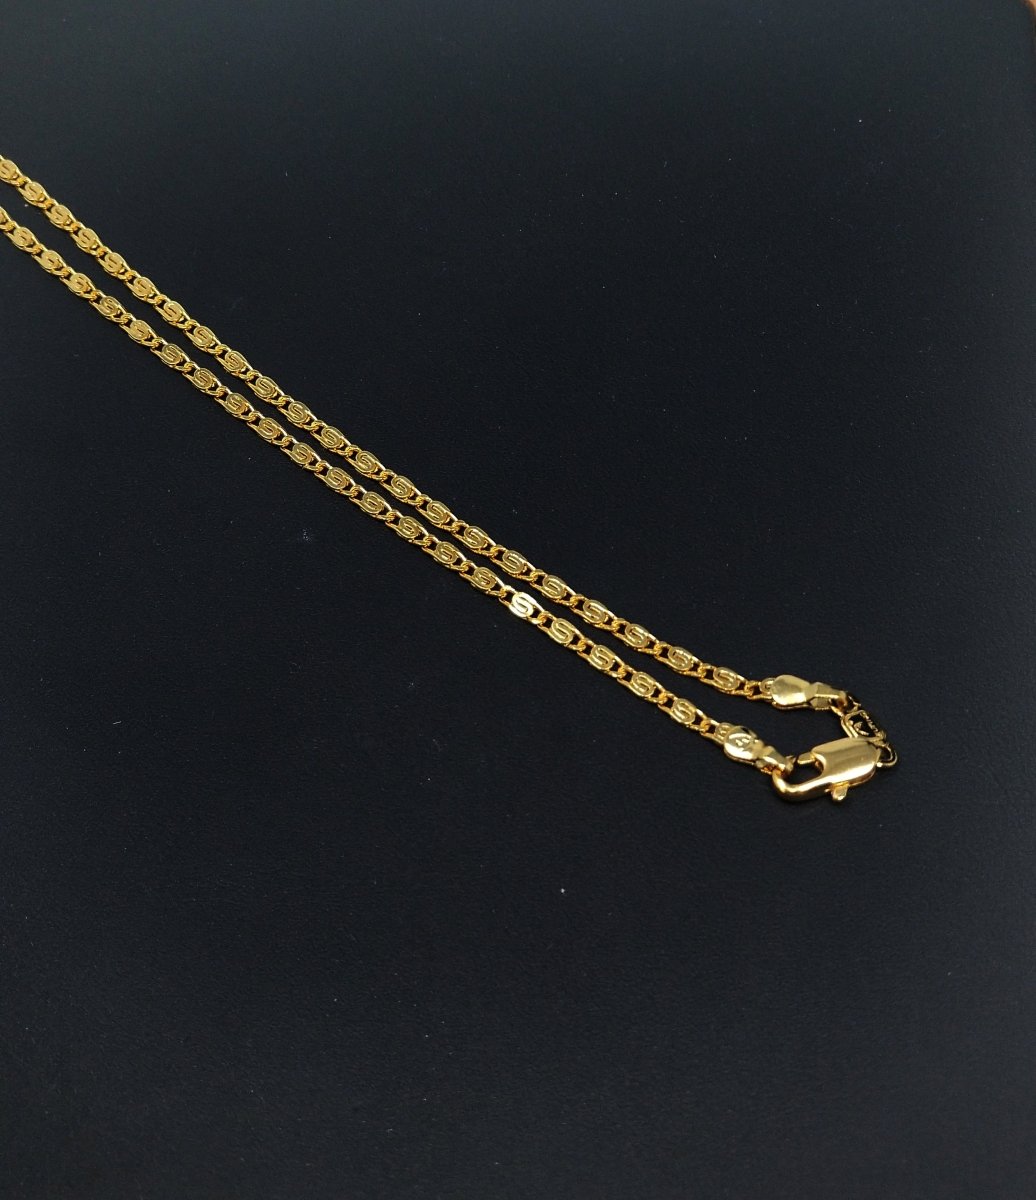 24K Gold Filled Scroll Snail Chain Necklace, 19.5 inch Snail Finished Chain Necklace For Jewelry Making, Dainty 2.2mm Snail Necklace w/ Lobster Clasps | CN-274 Clearance Pricing - DLUXCA